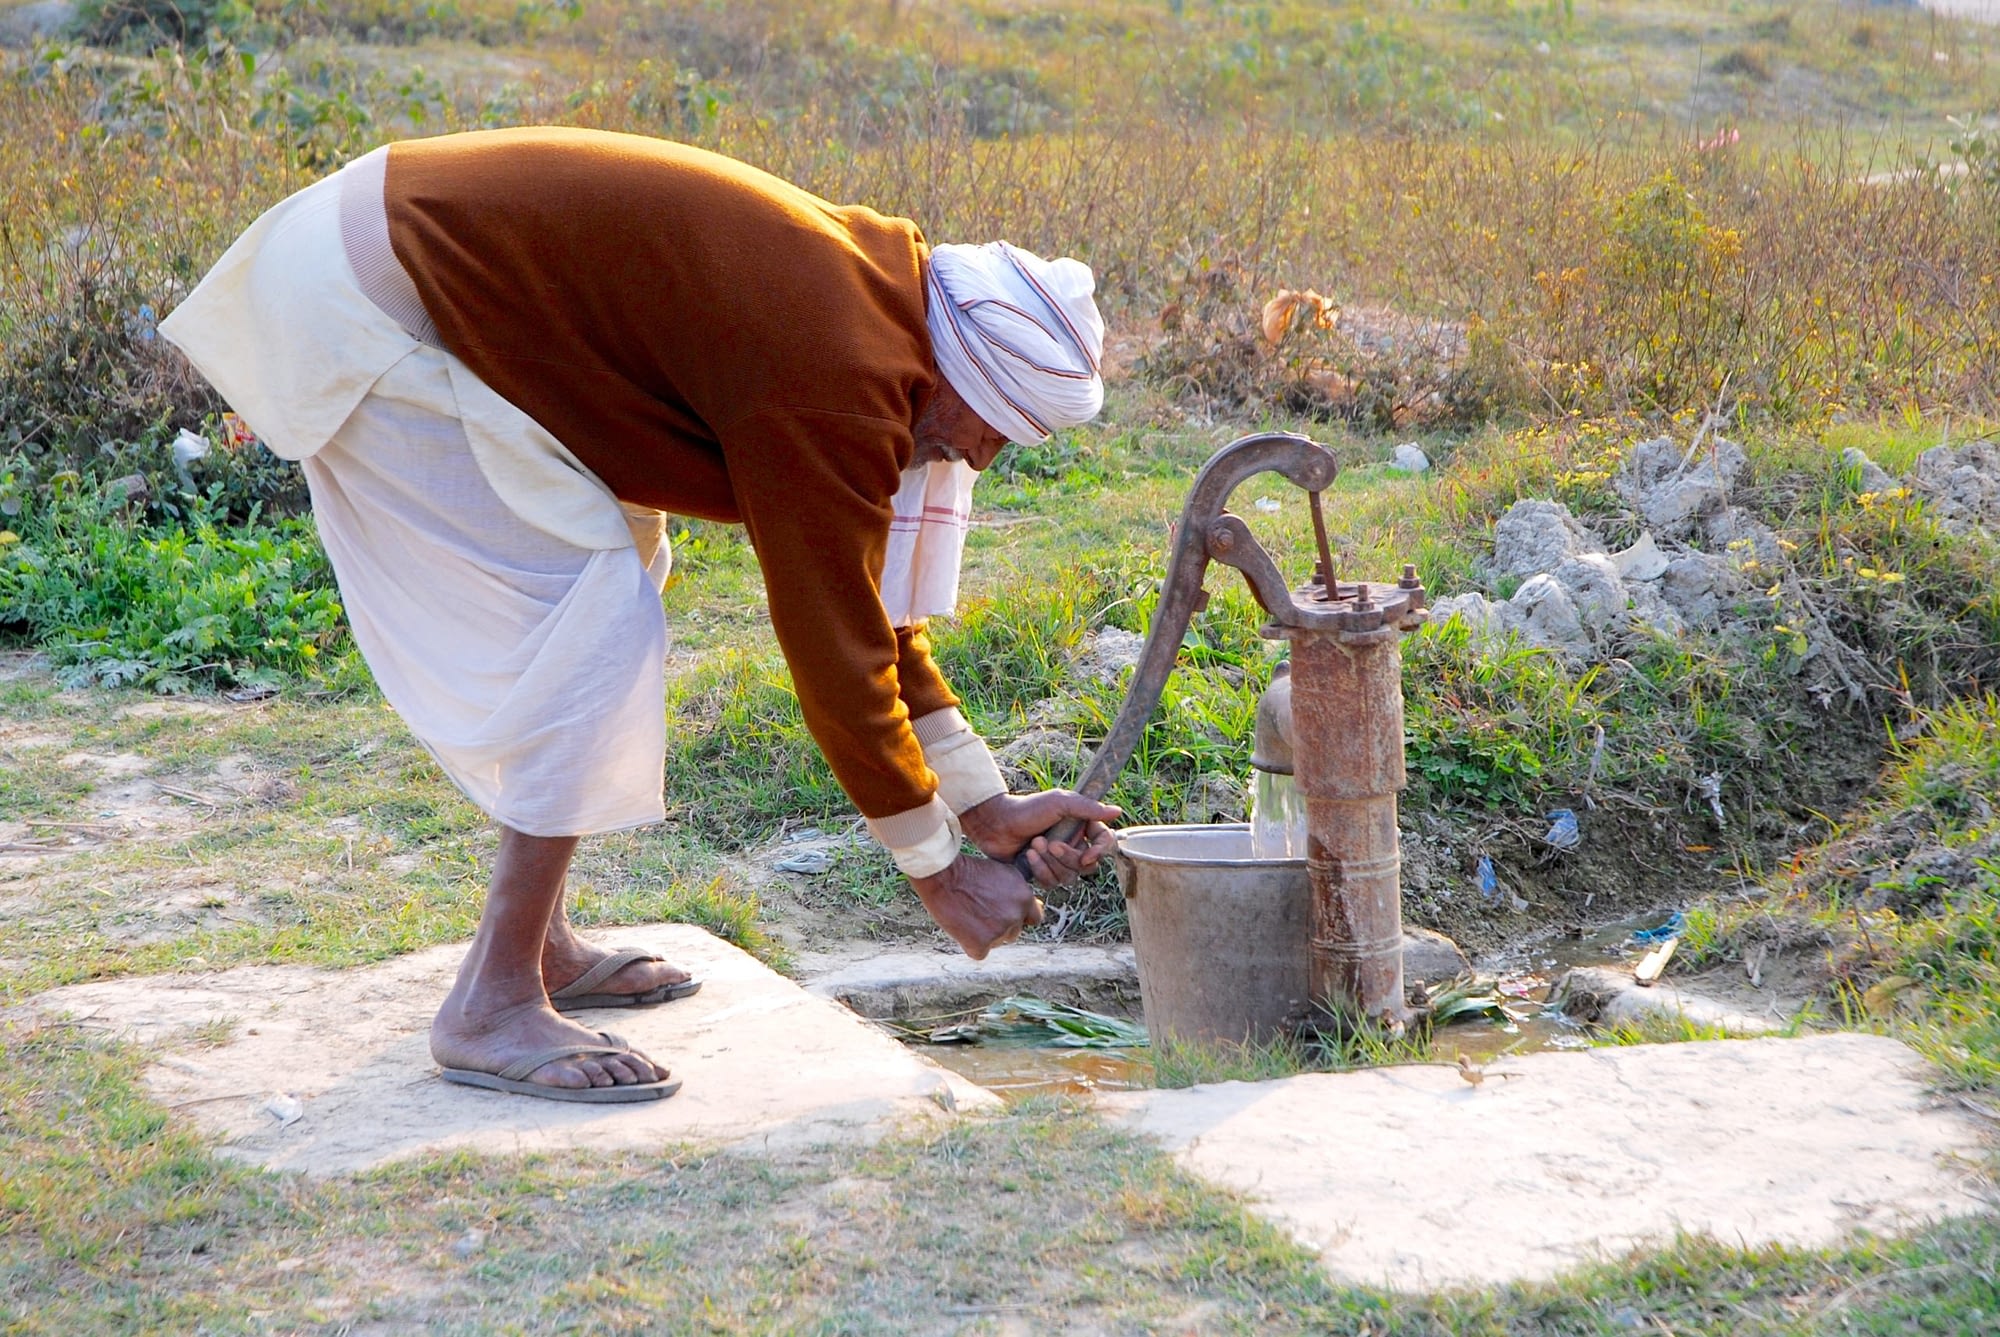 A farmer pumps water in a field close to the Pusa site of the Borlaug Institute for South Asia (BISA), in India’s Bihar state. (Credit: M. DeFreese/CIMMYT)